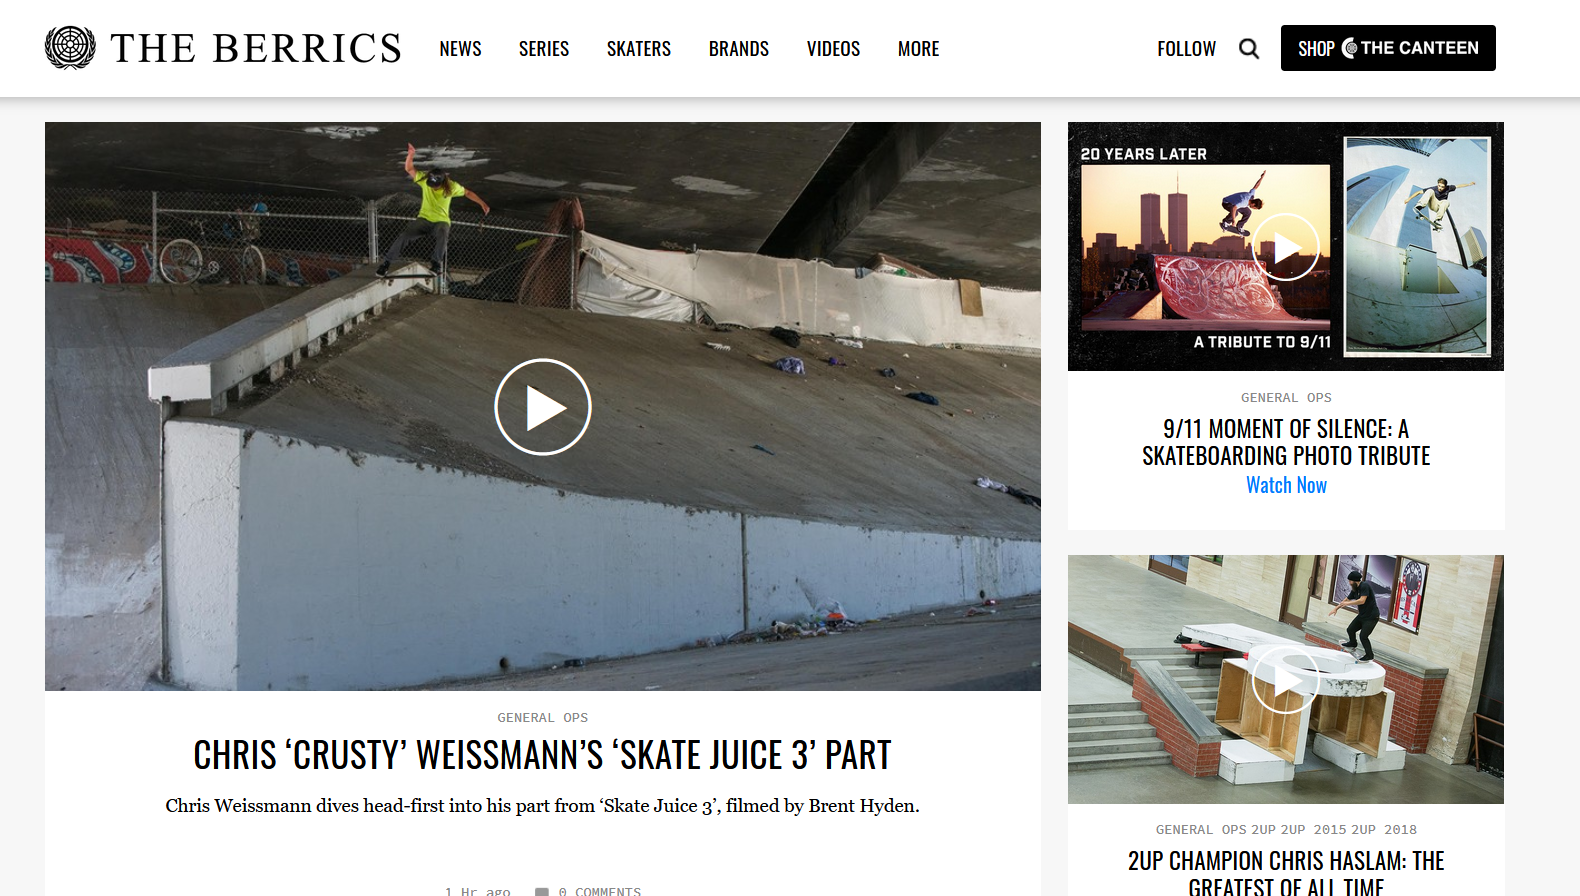 Crusty's new 'Skate Juice 3' Full Part playing now on The Berrics